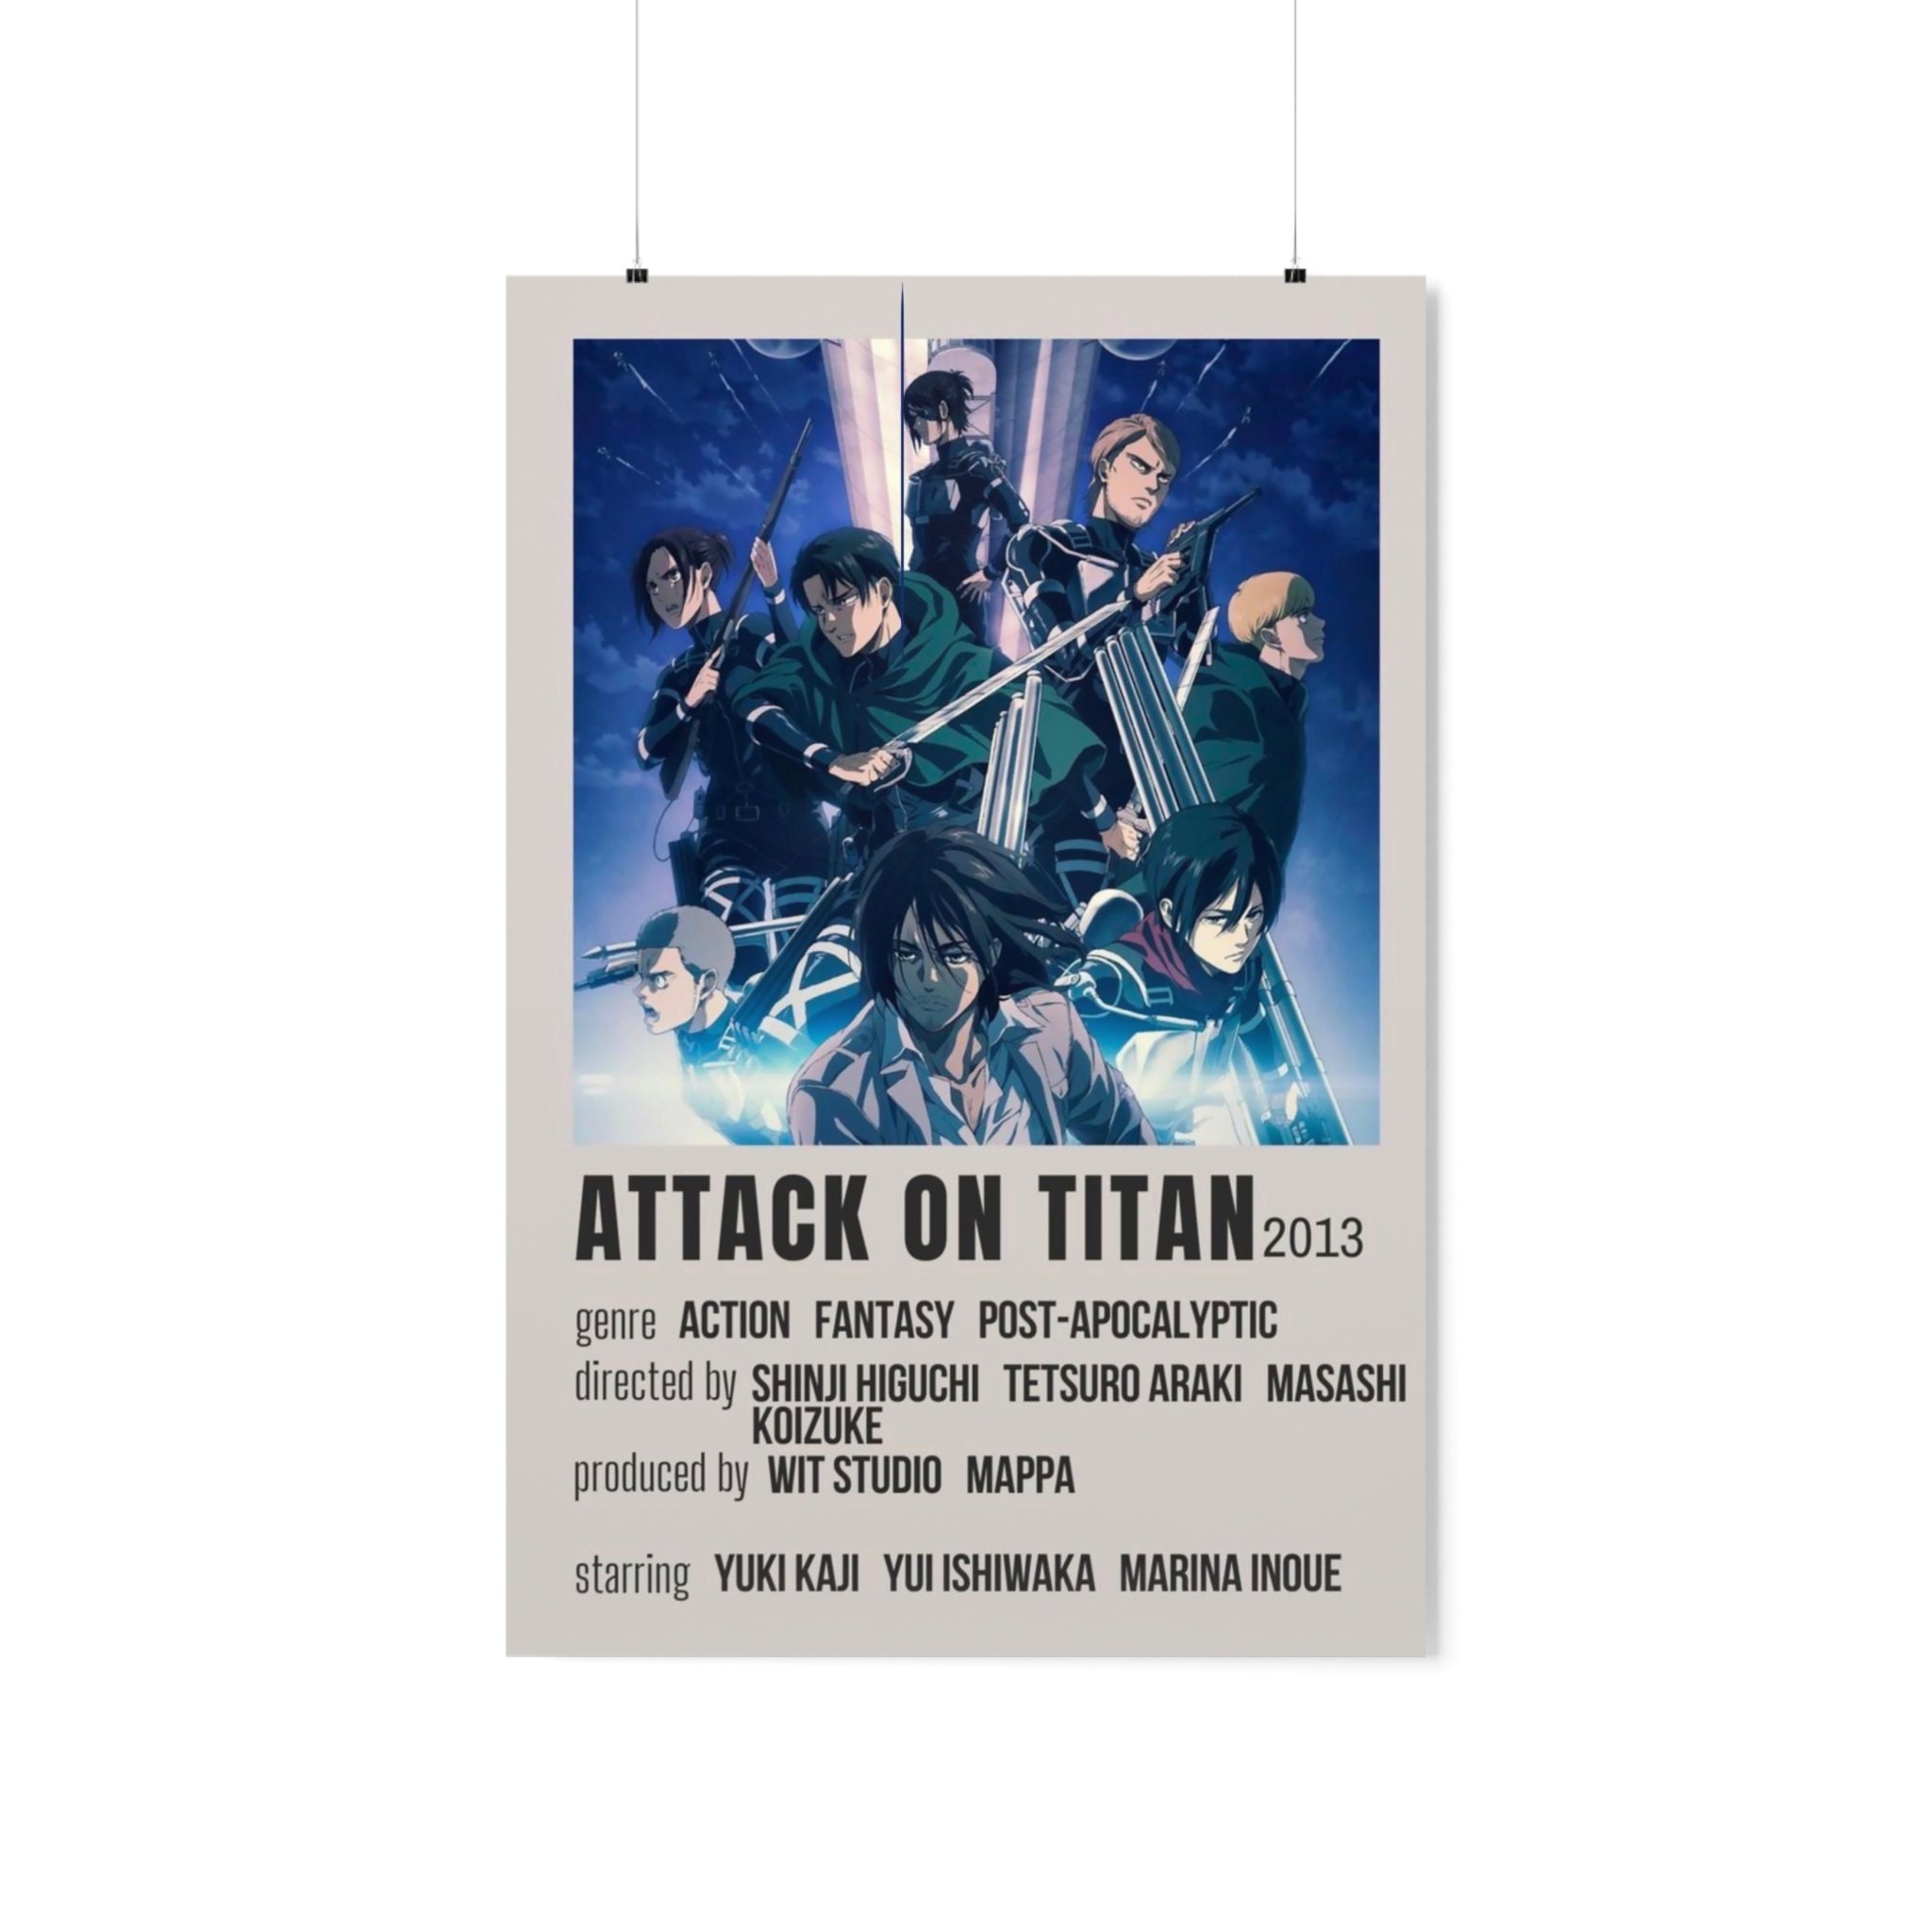 Attack on Titan Custom Skins View topic - Neon Blue Skin: Message